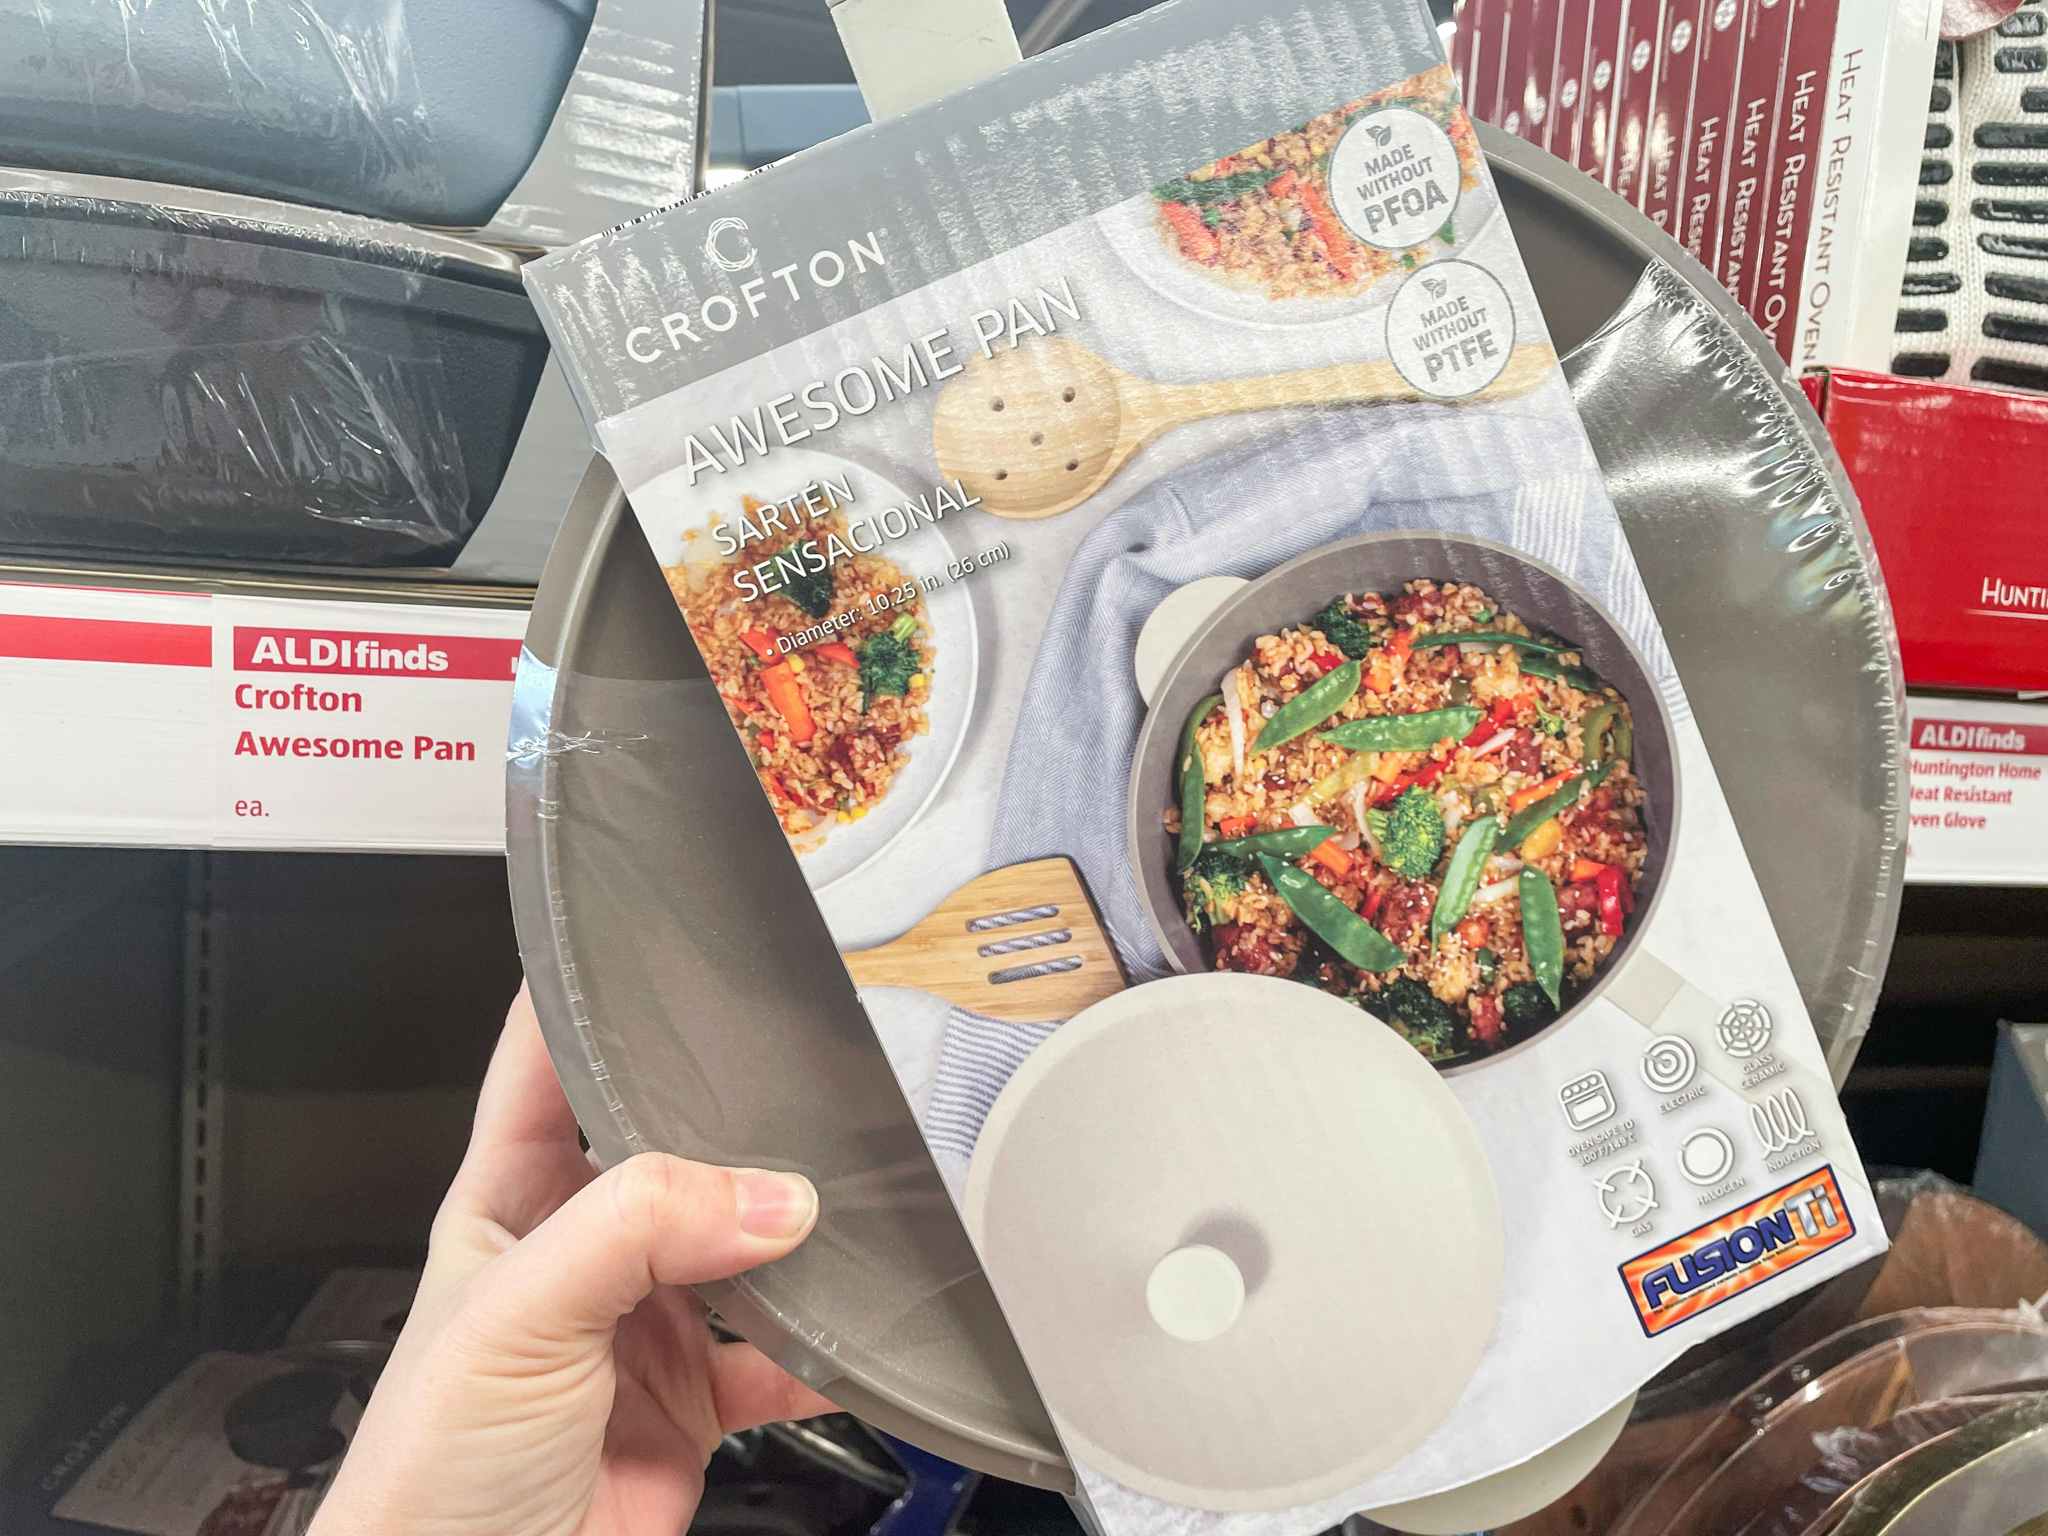 Someone holding up the Crofton Awesome Pan inside an Aldi